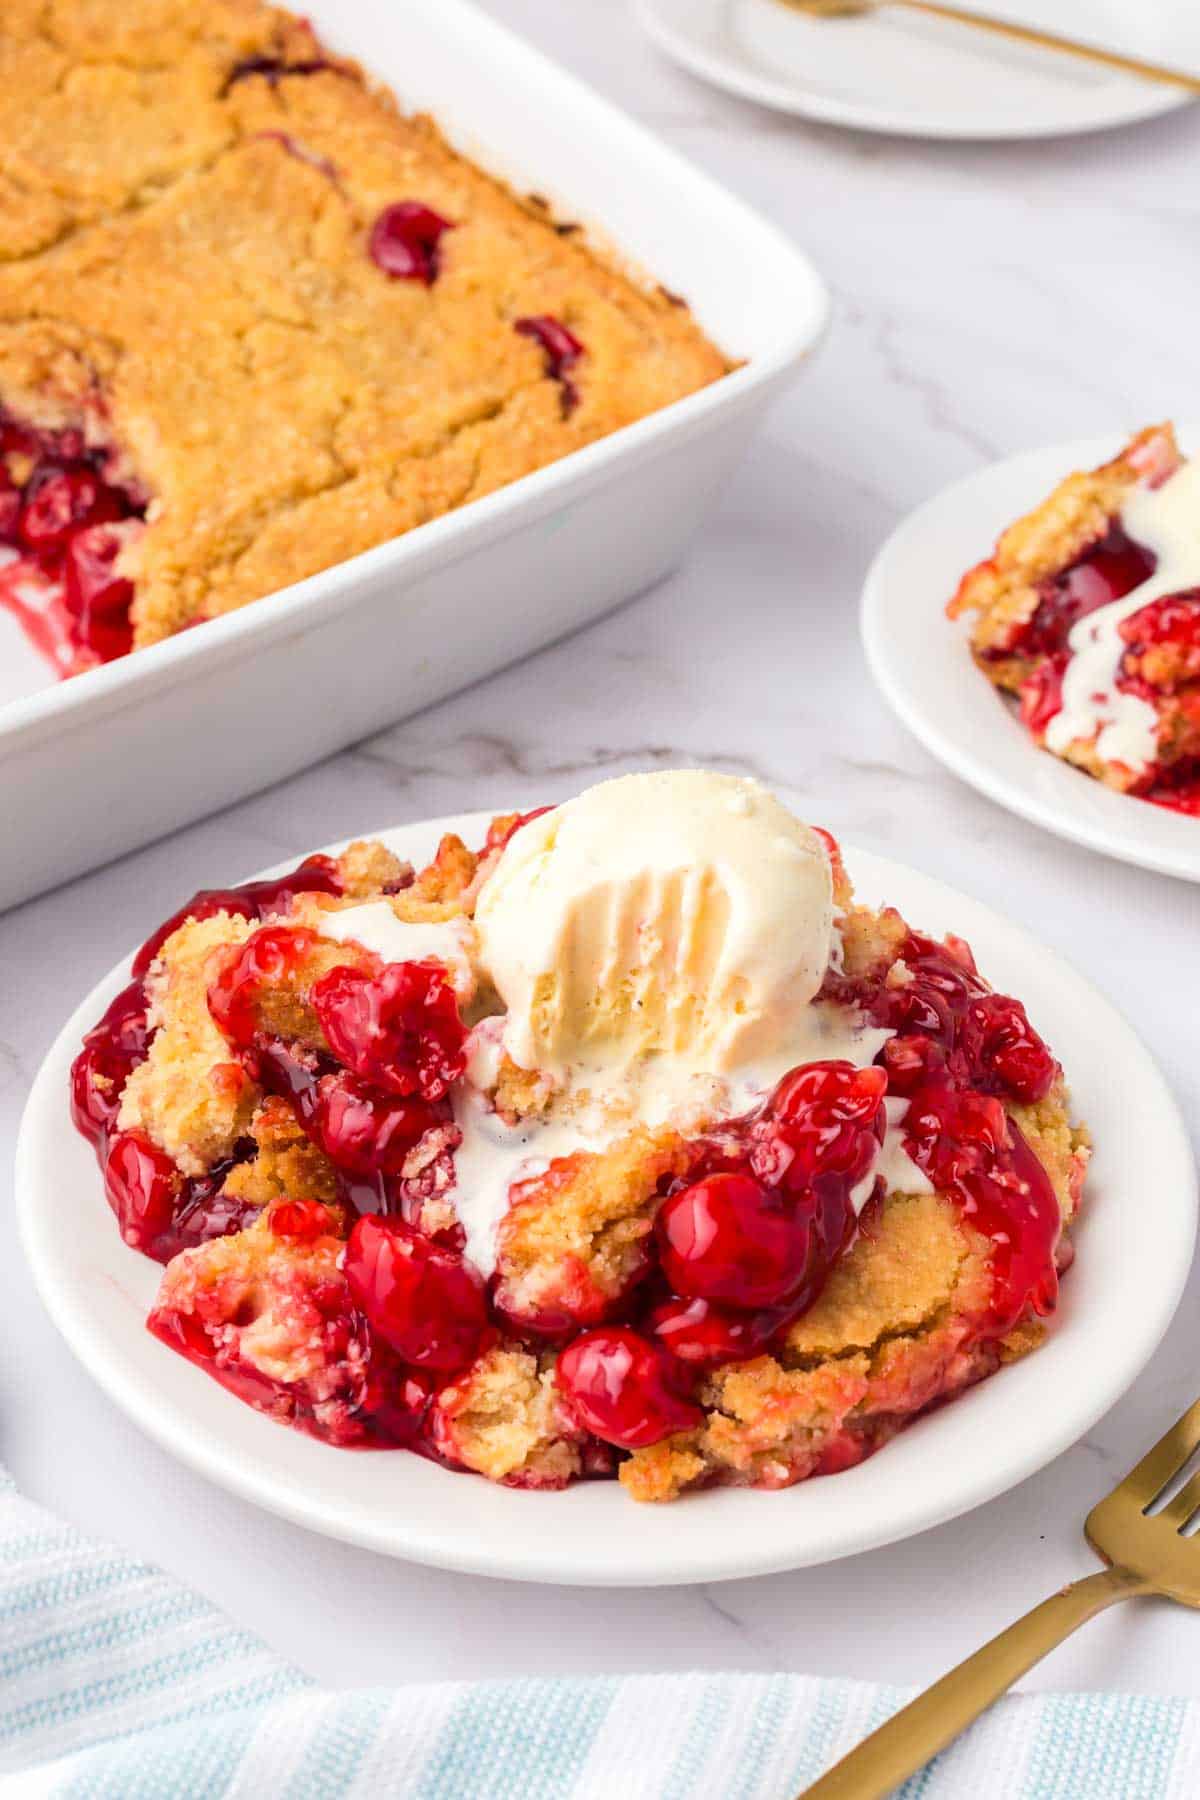 Cherry Dump Cake is an easy dessert recipe made with cherry pie filling, vanilla cake mix, crumbled butter cookies, vanilla extract and butter.